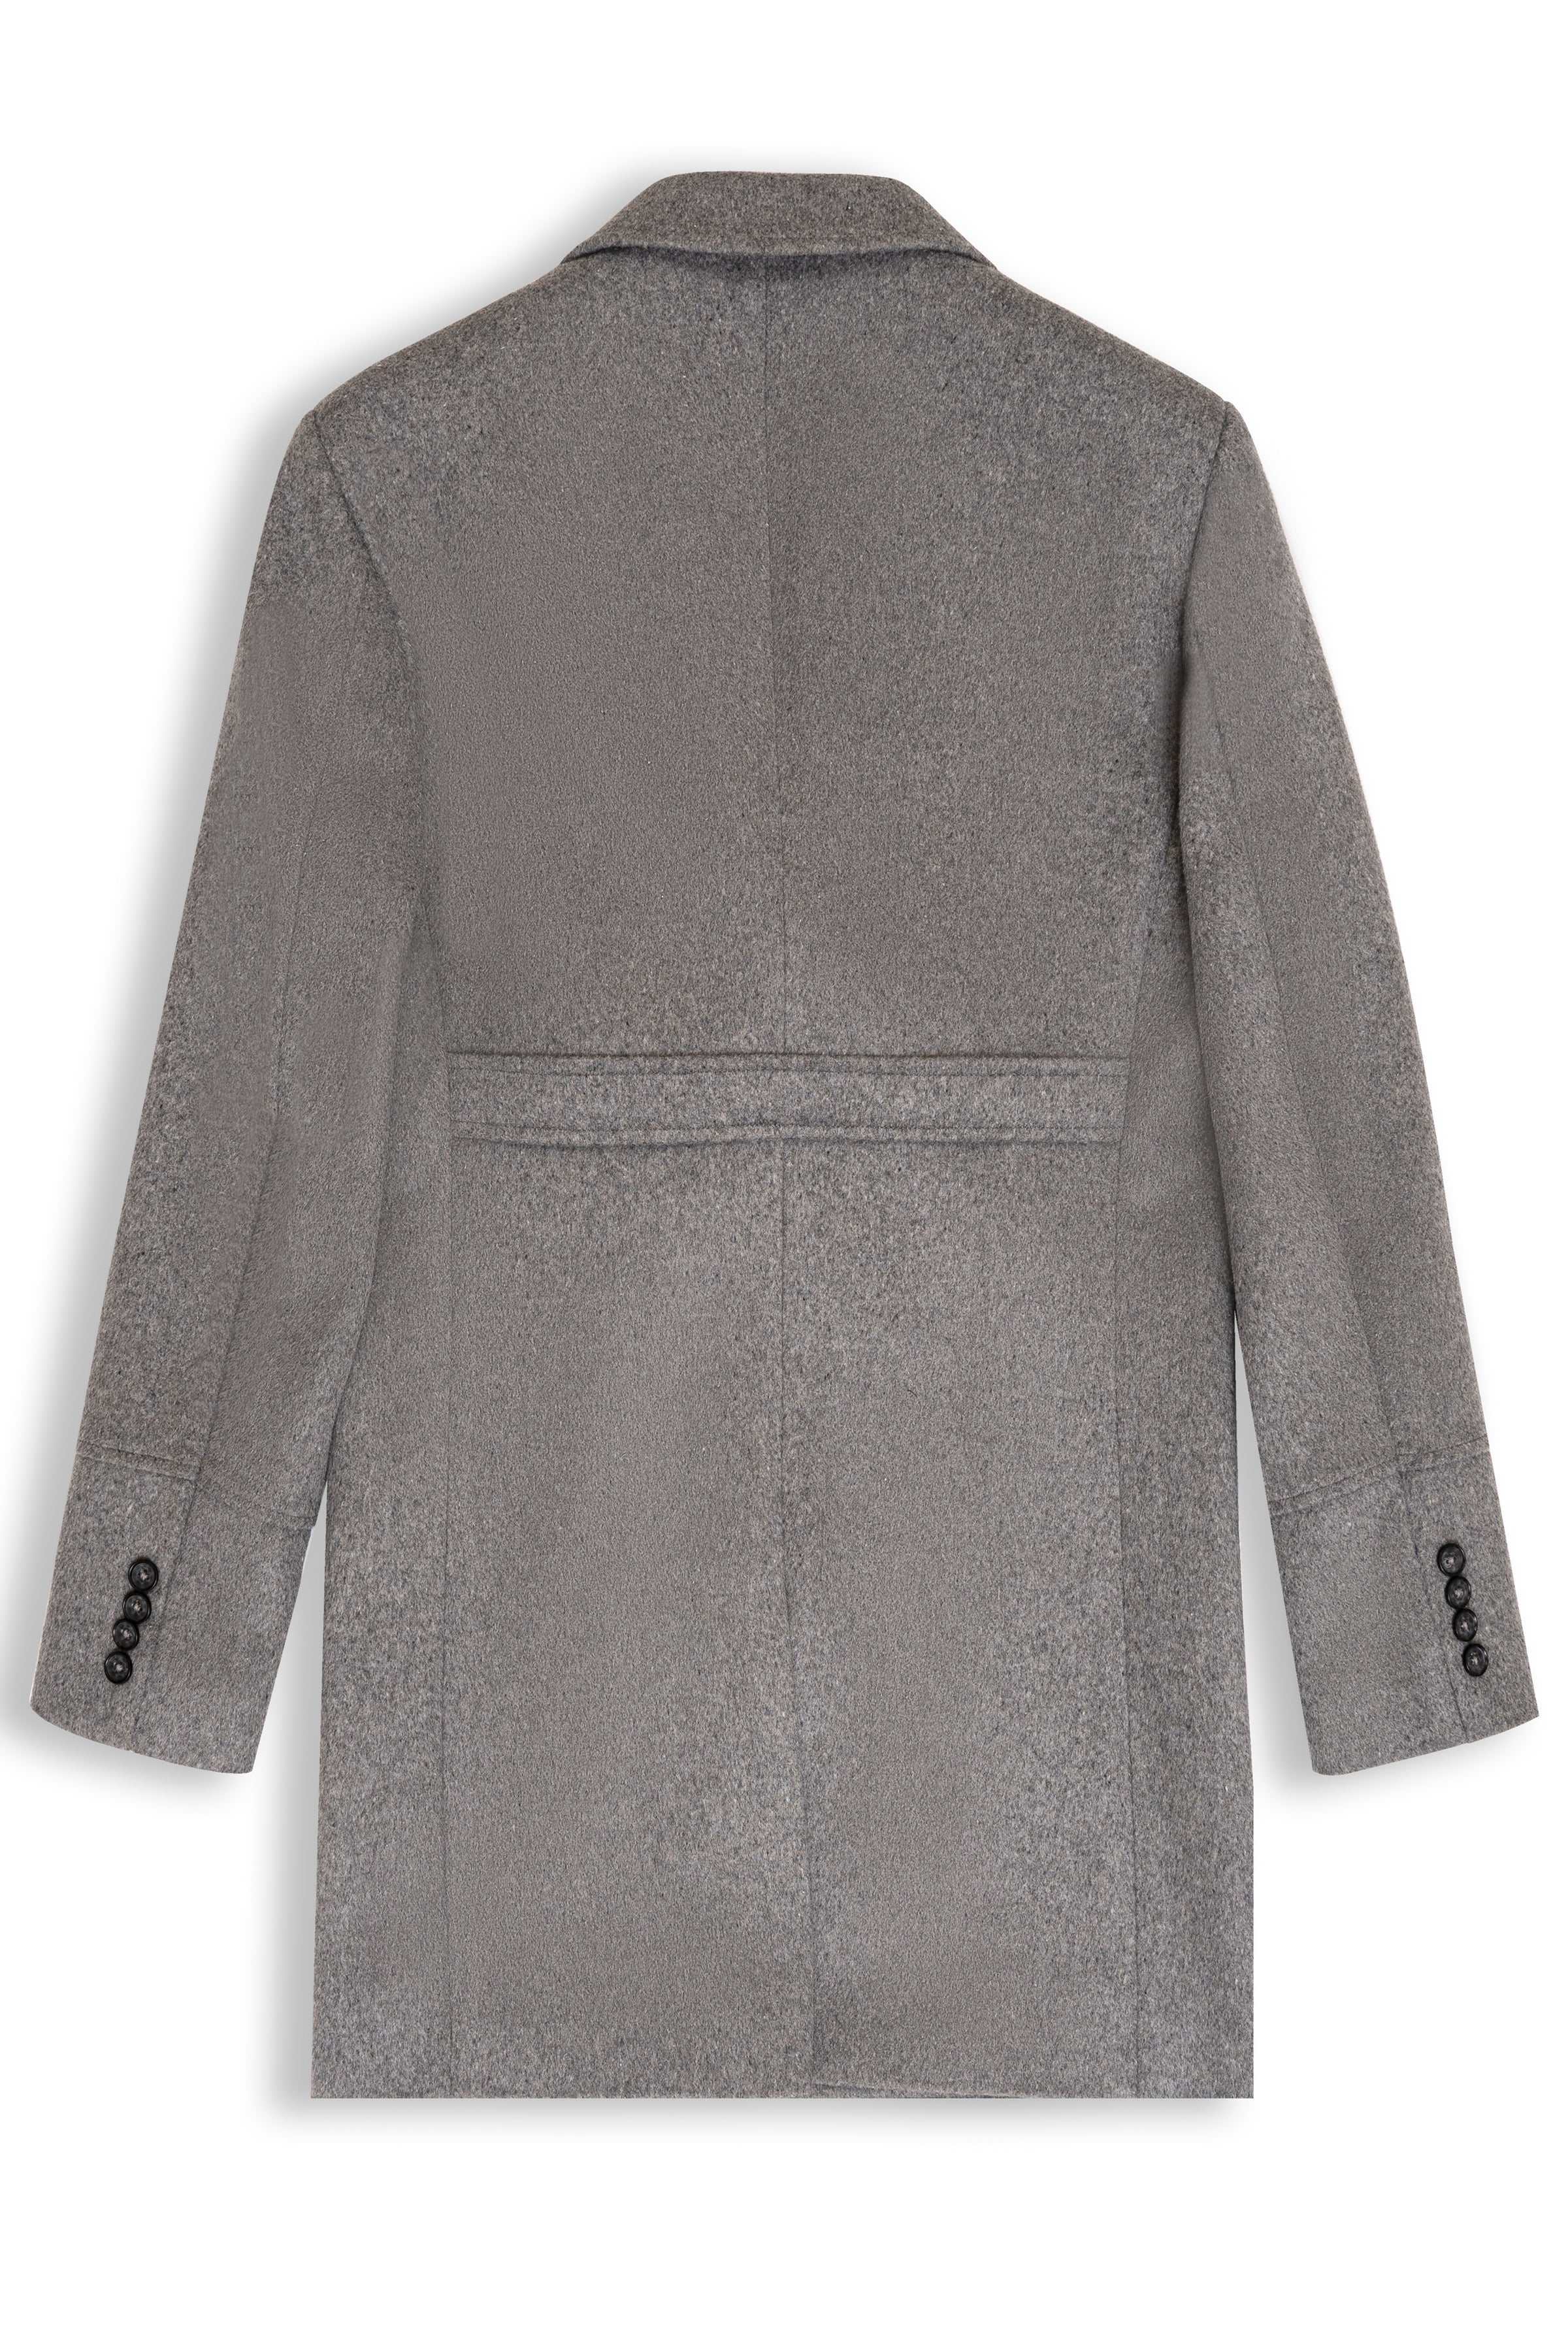 WOOLEN LONG COAT DOUBLE BREASTED LIGHT DARK GREY at Charcoal Clothing